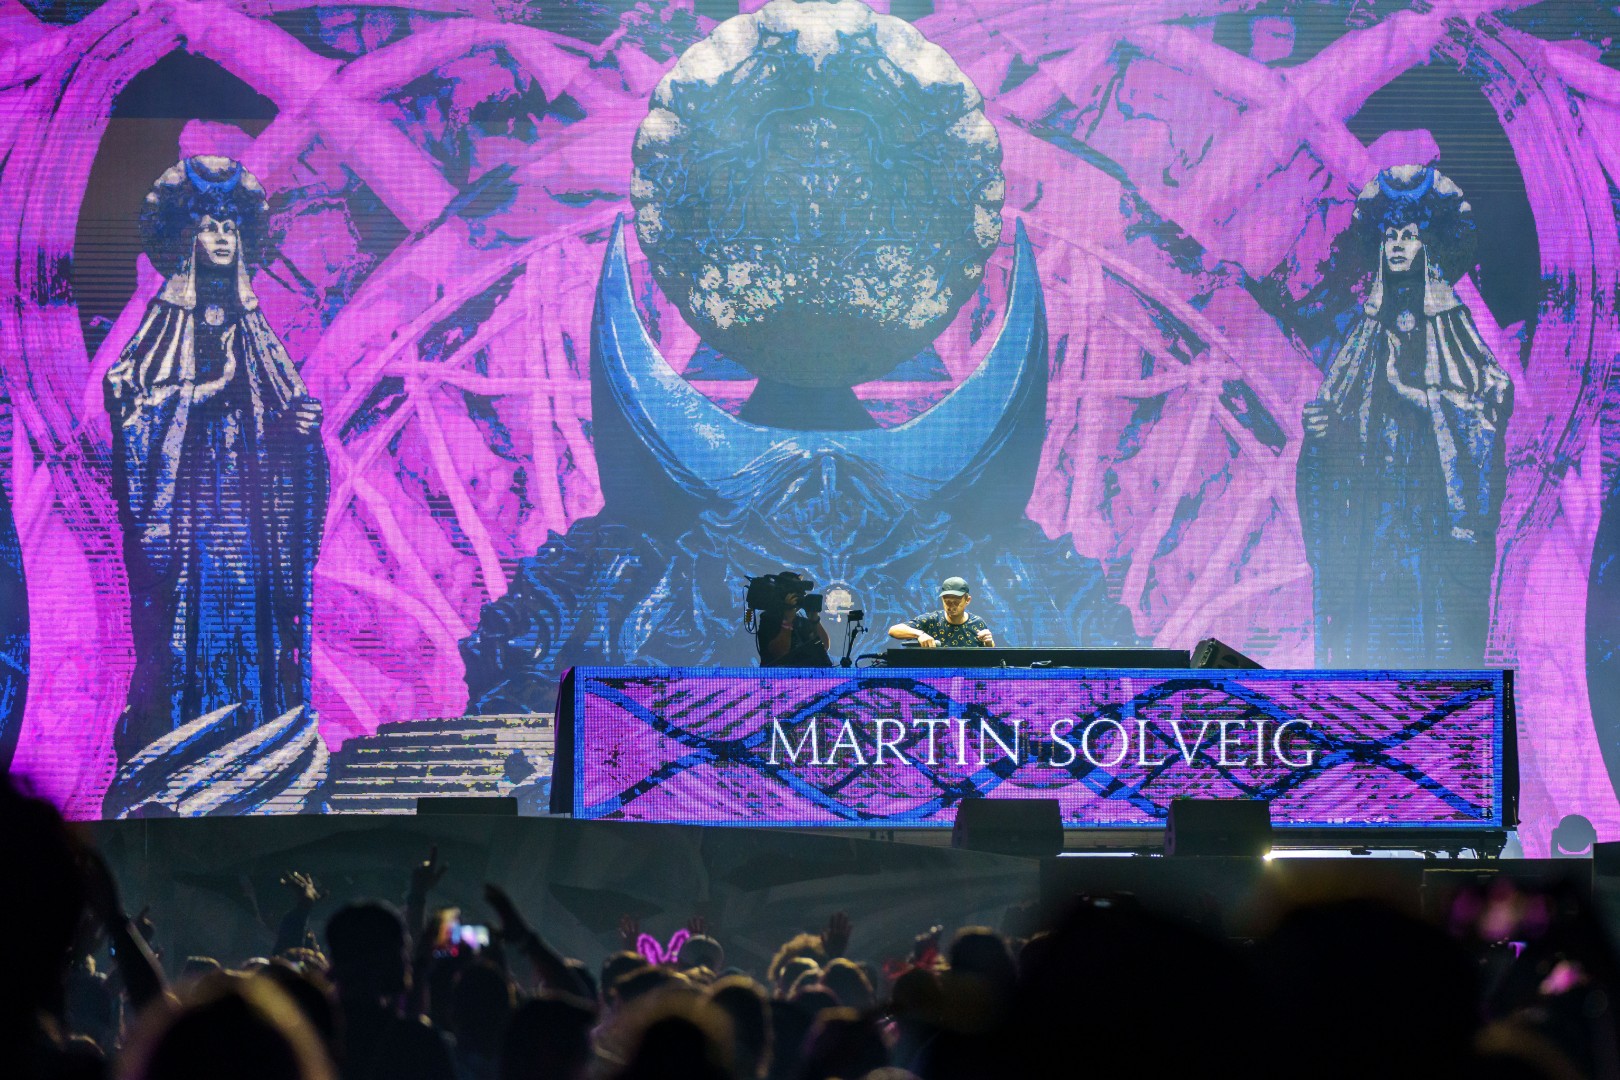 Martin Solveig at Cluj Arena in Cluj-Napoca on September 12, 2021 (1f2d0a6f8c)